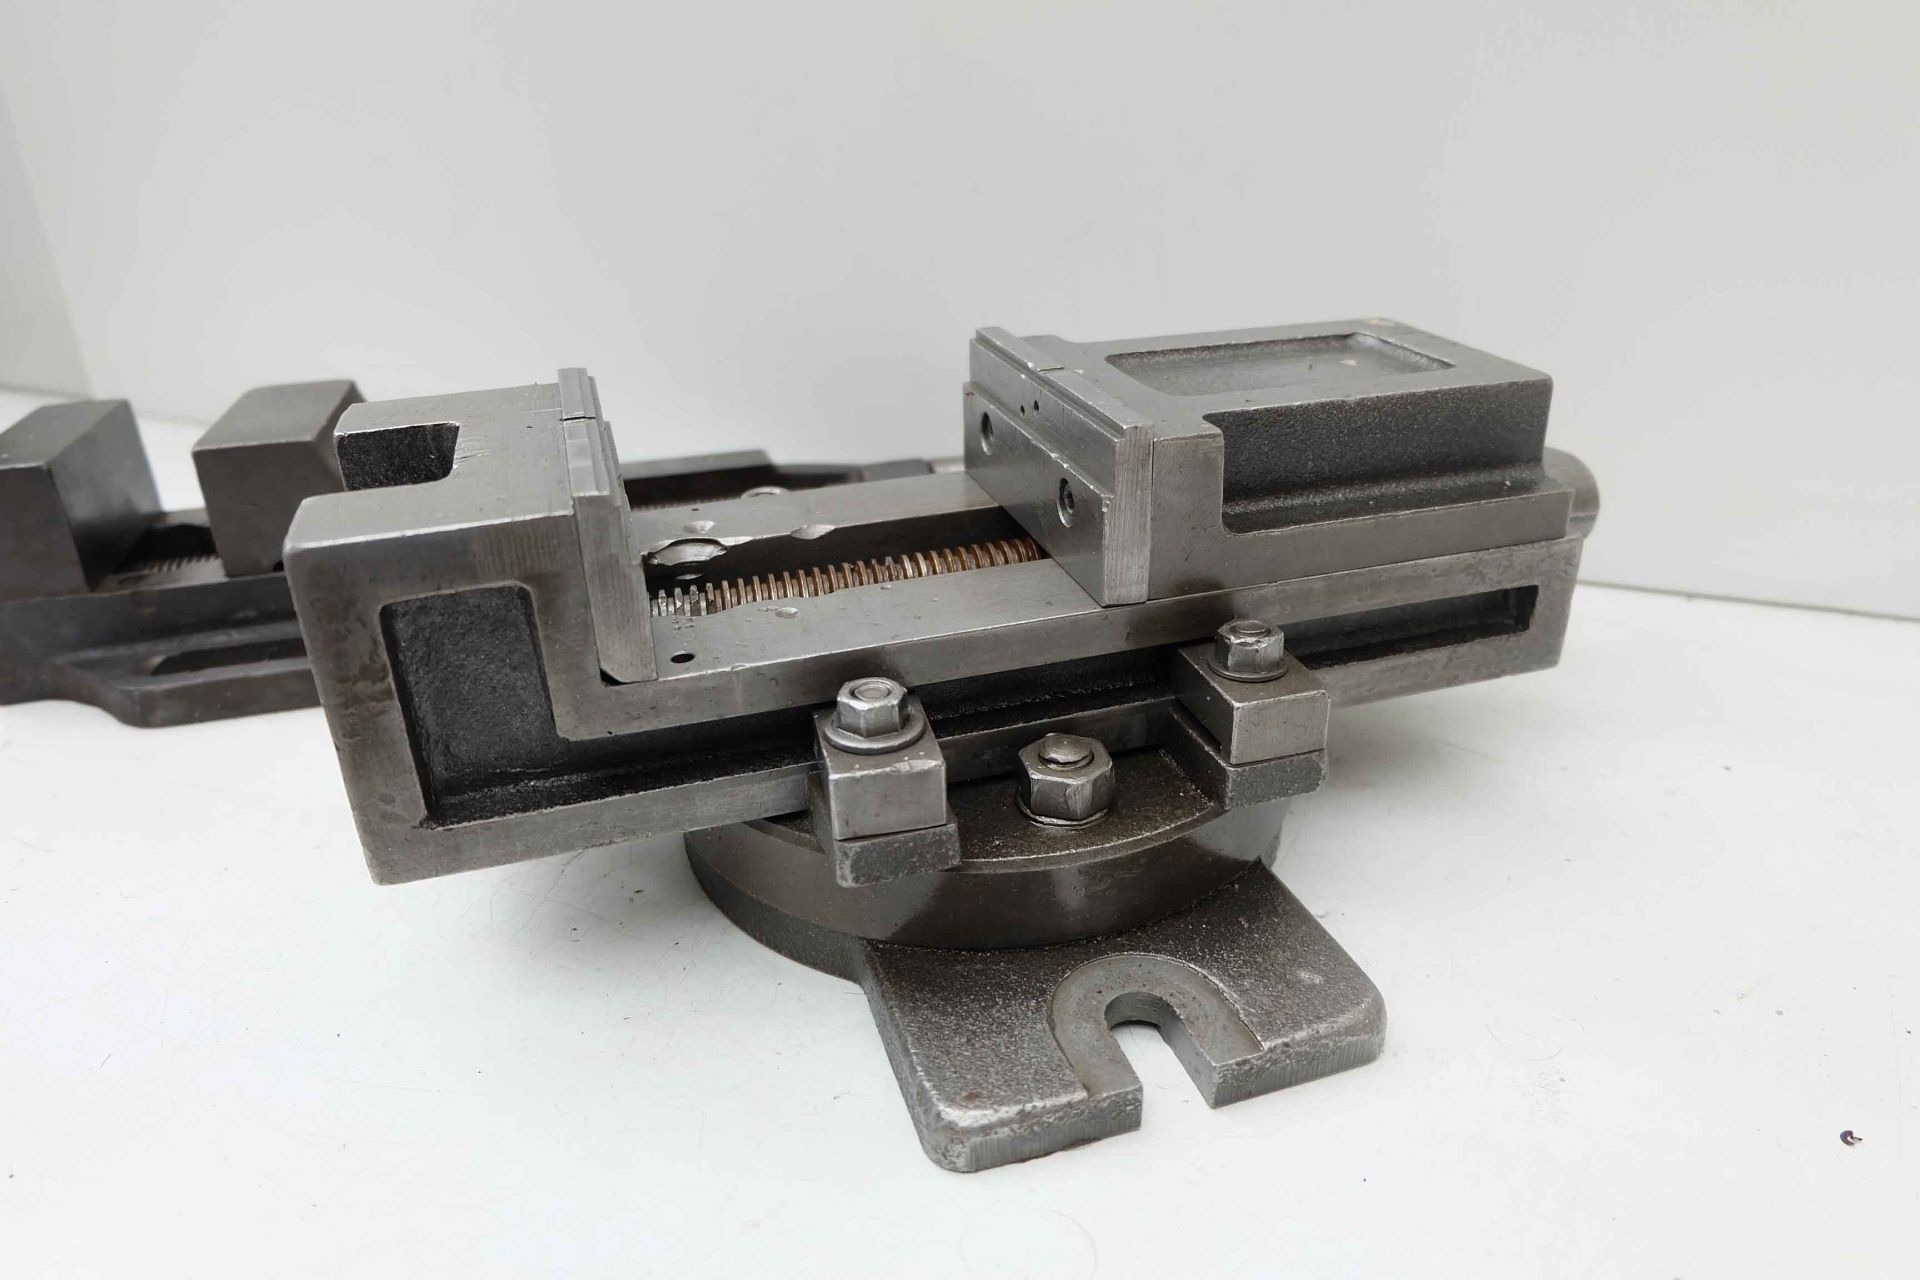 2 x Machine Vices. 1 x 4" on Swivel Base and 1 x 3 1/2" x 7" Opening. - Image 2 of 7